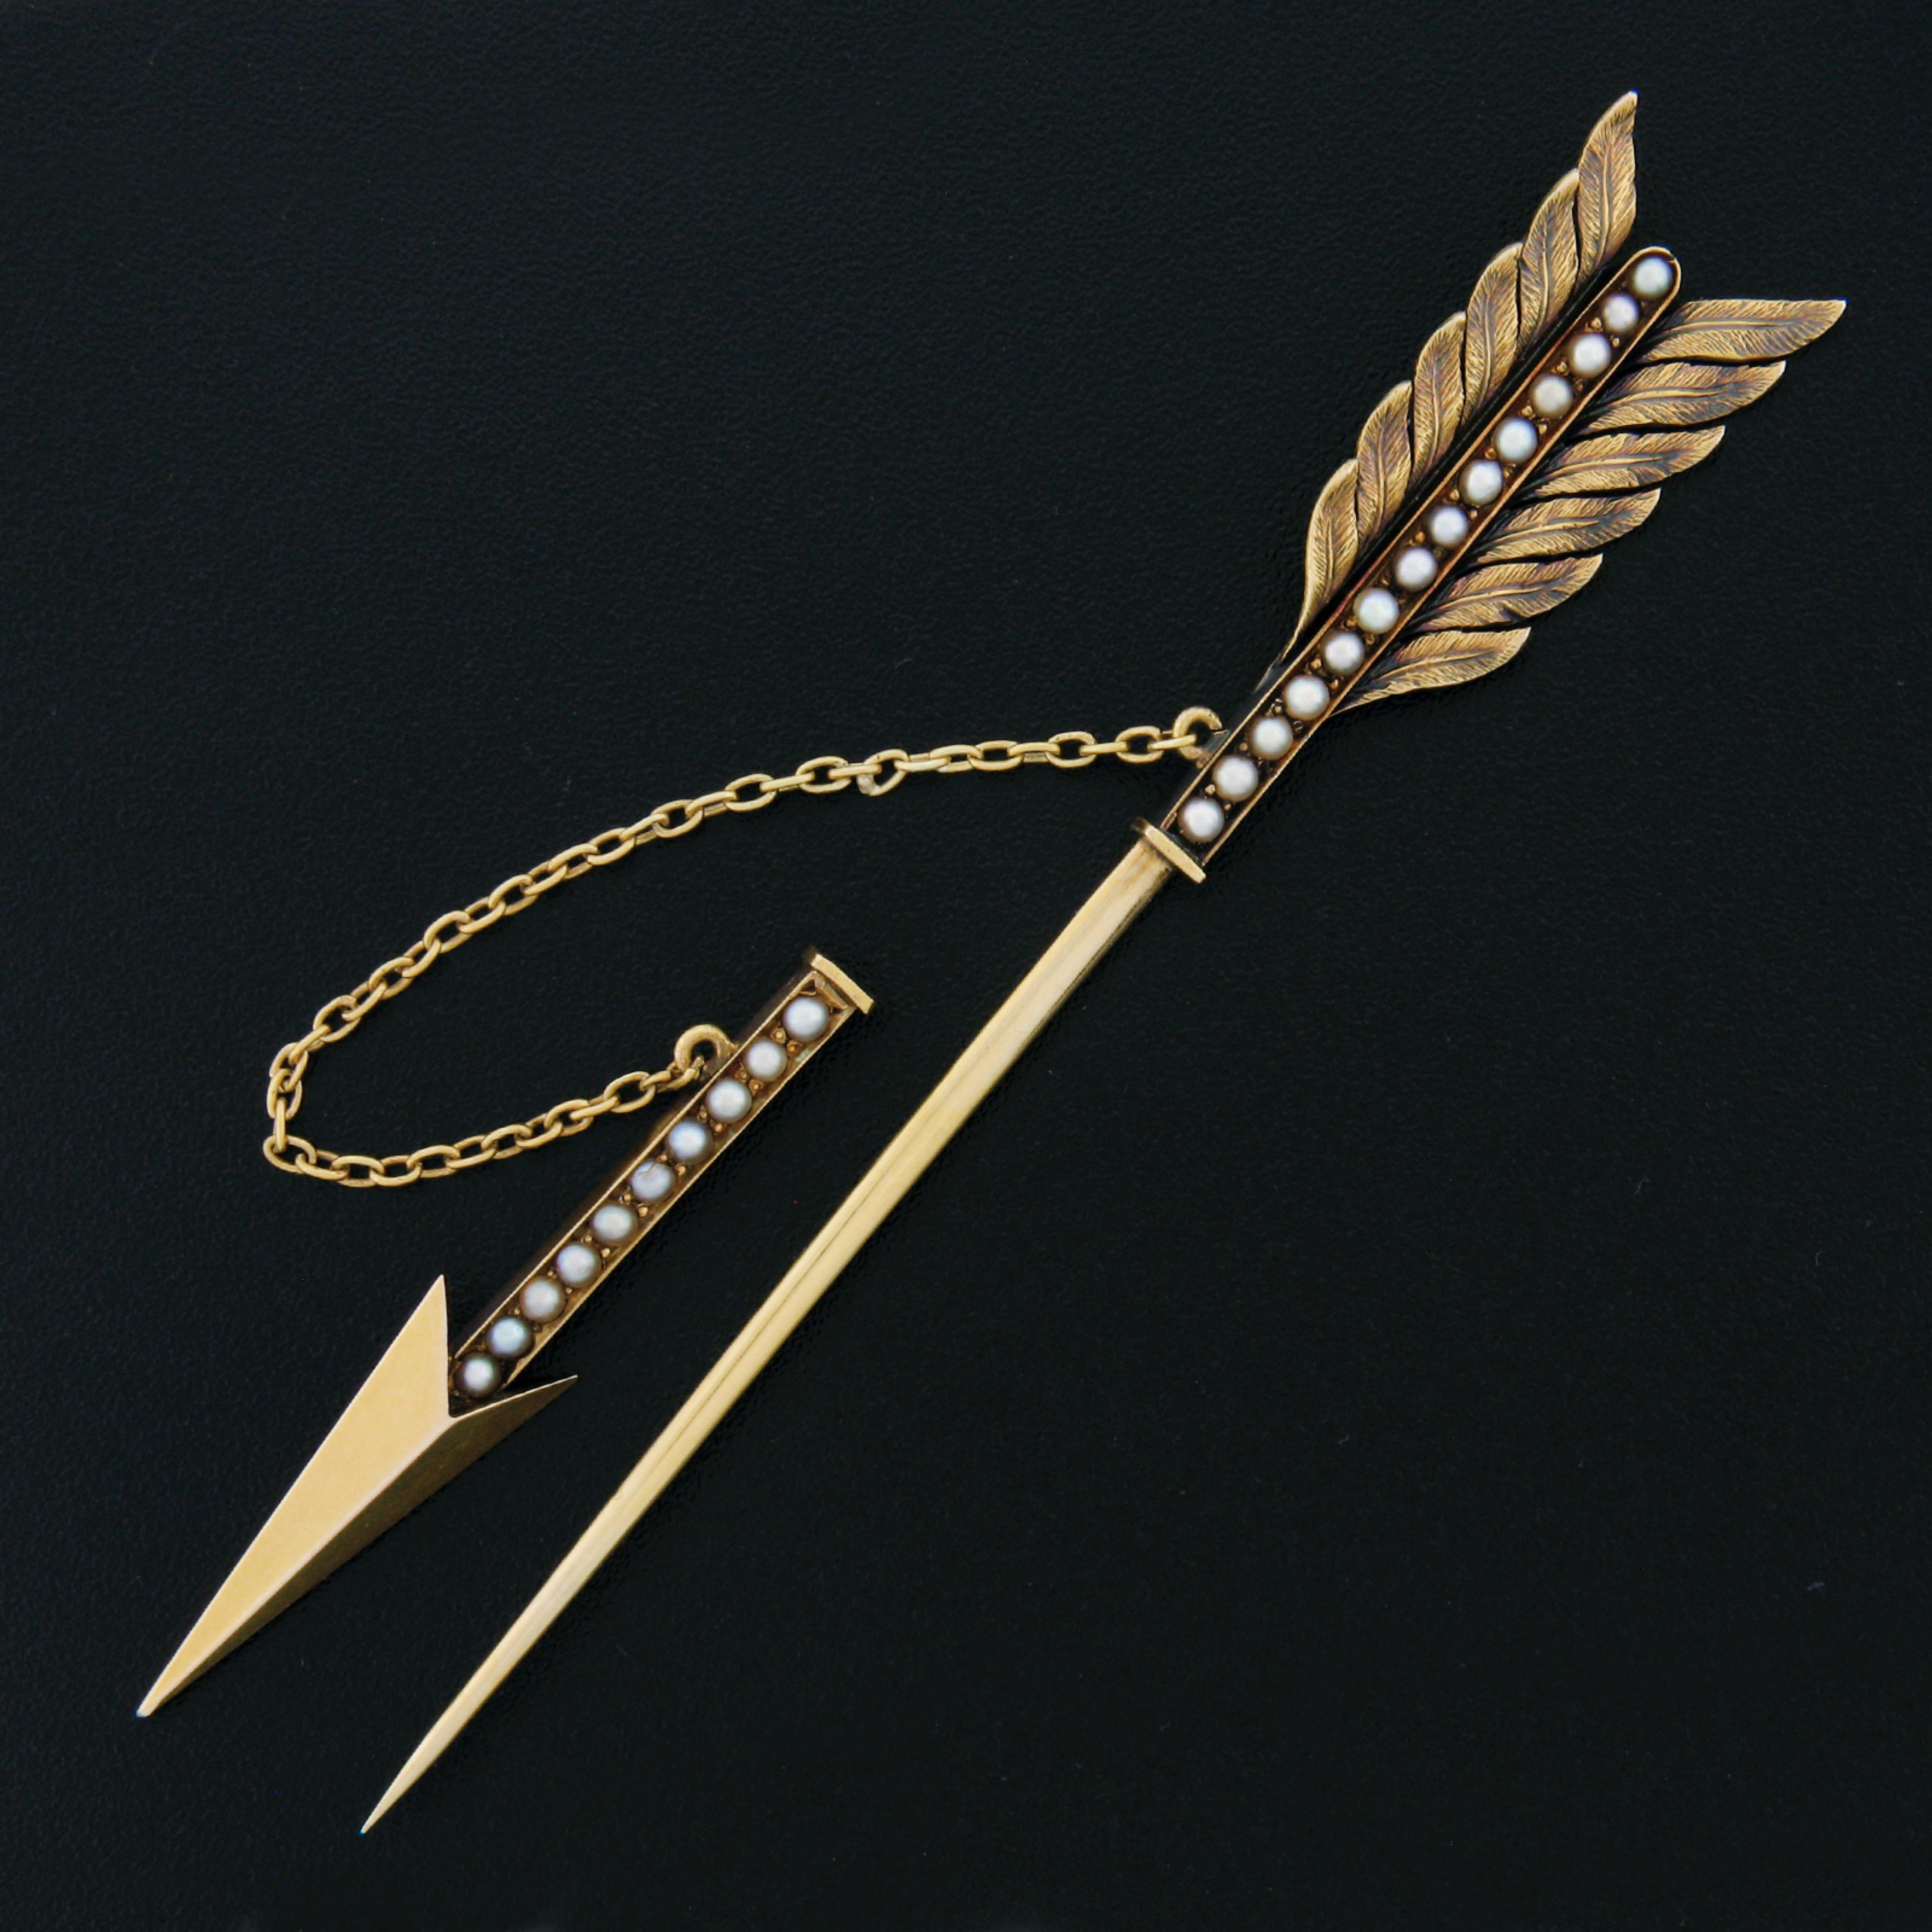 This incredible antique pin brooch was crafted from solid 14k yellow gold during the Victorian era and features a large, outstandingly made, and detailed arrow design that is neatly set with cultured seed pearls throughout. The adorable pearls